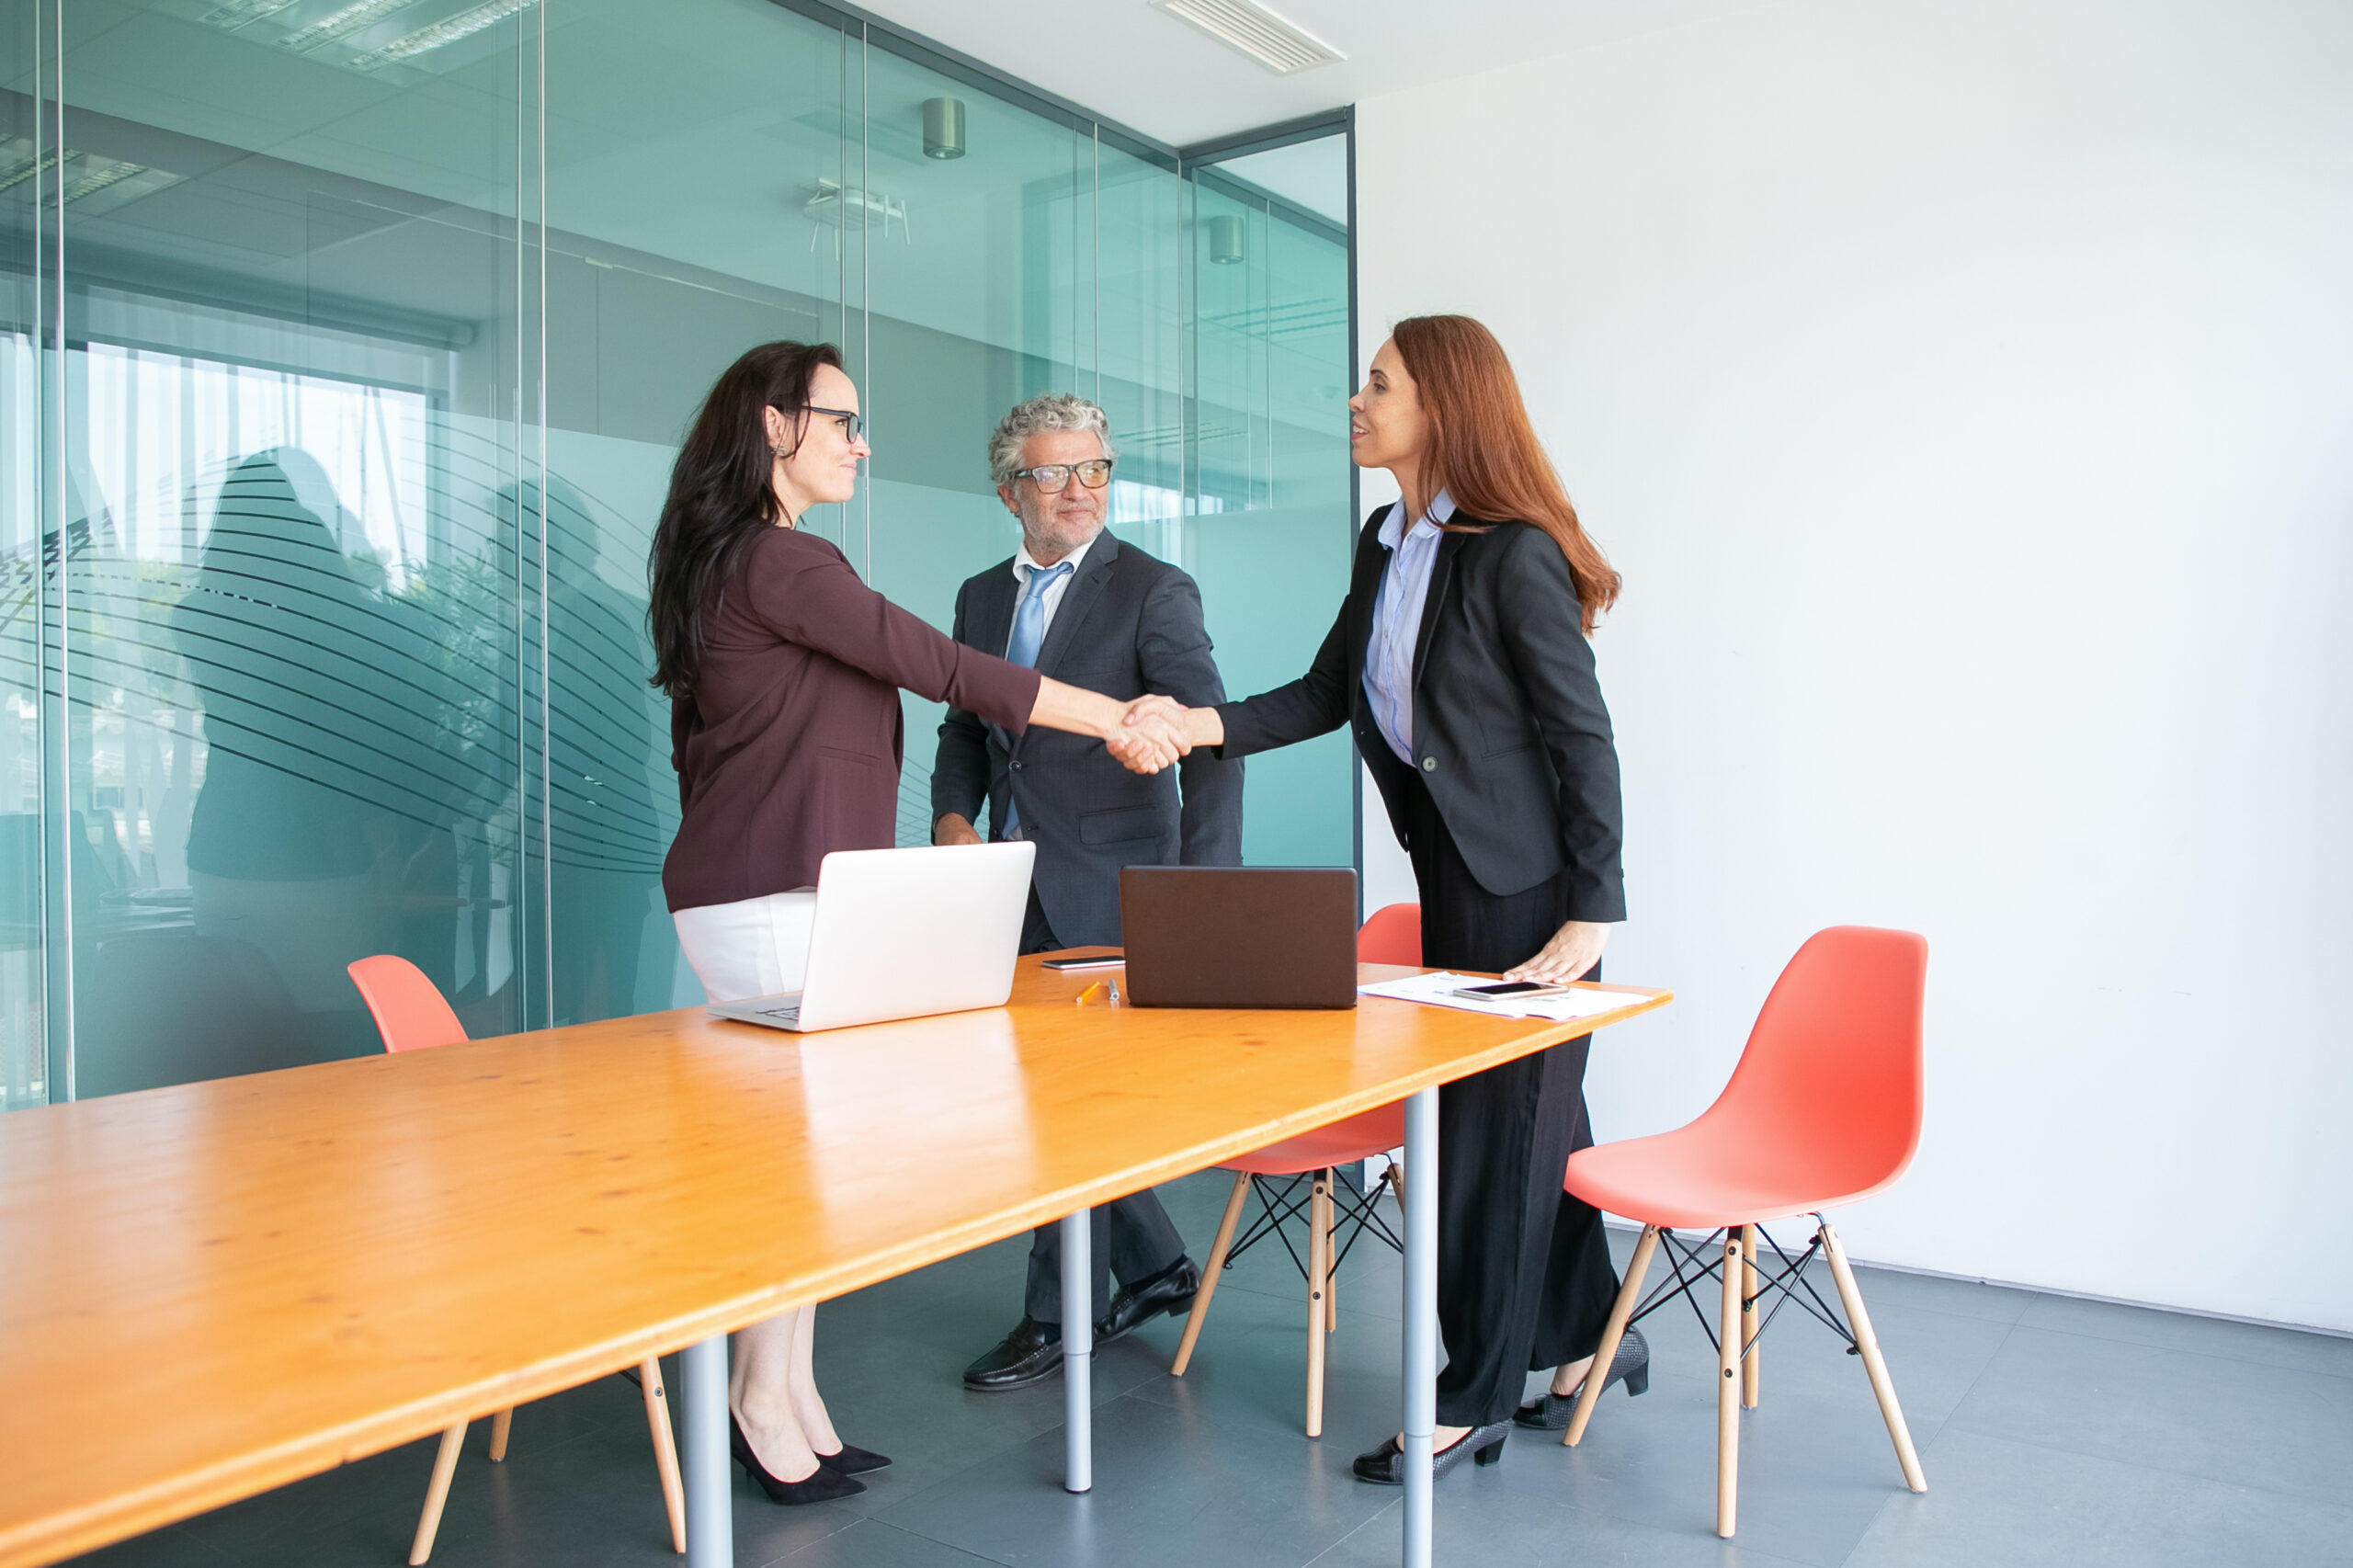 Smiling businesspeople standing and meeting in conference room. Successful content businesswomen handshaking and greeting each other in office. Business and cooperation concept